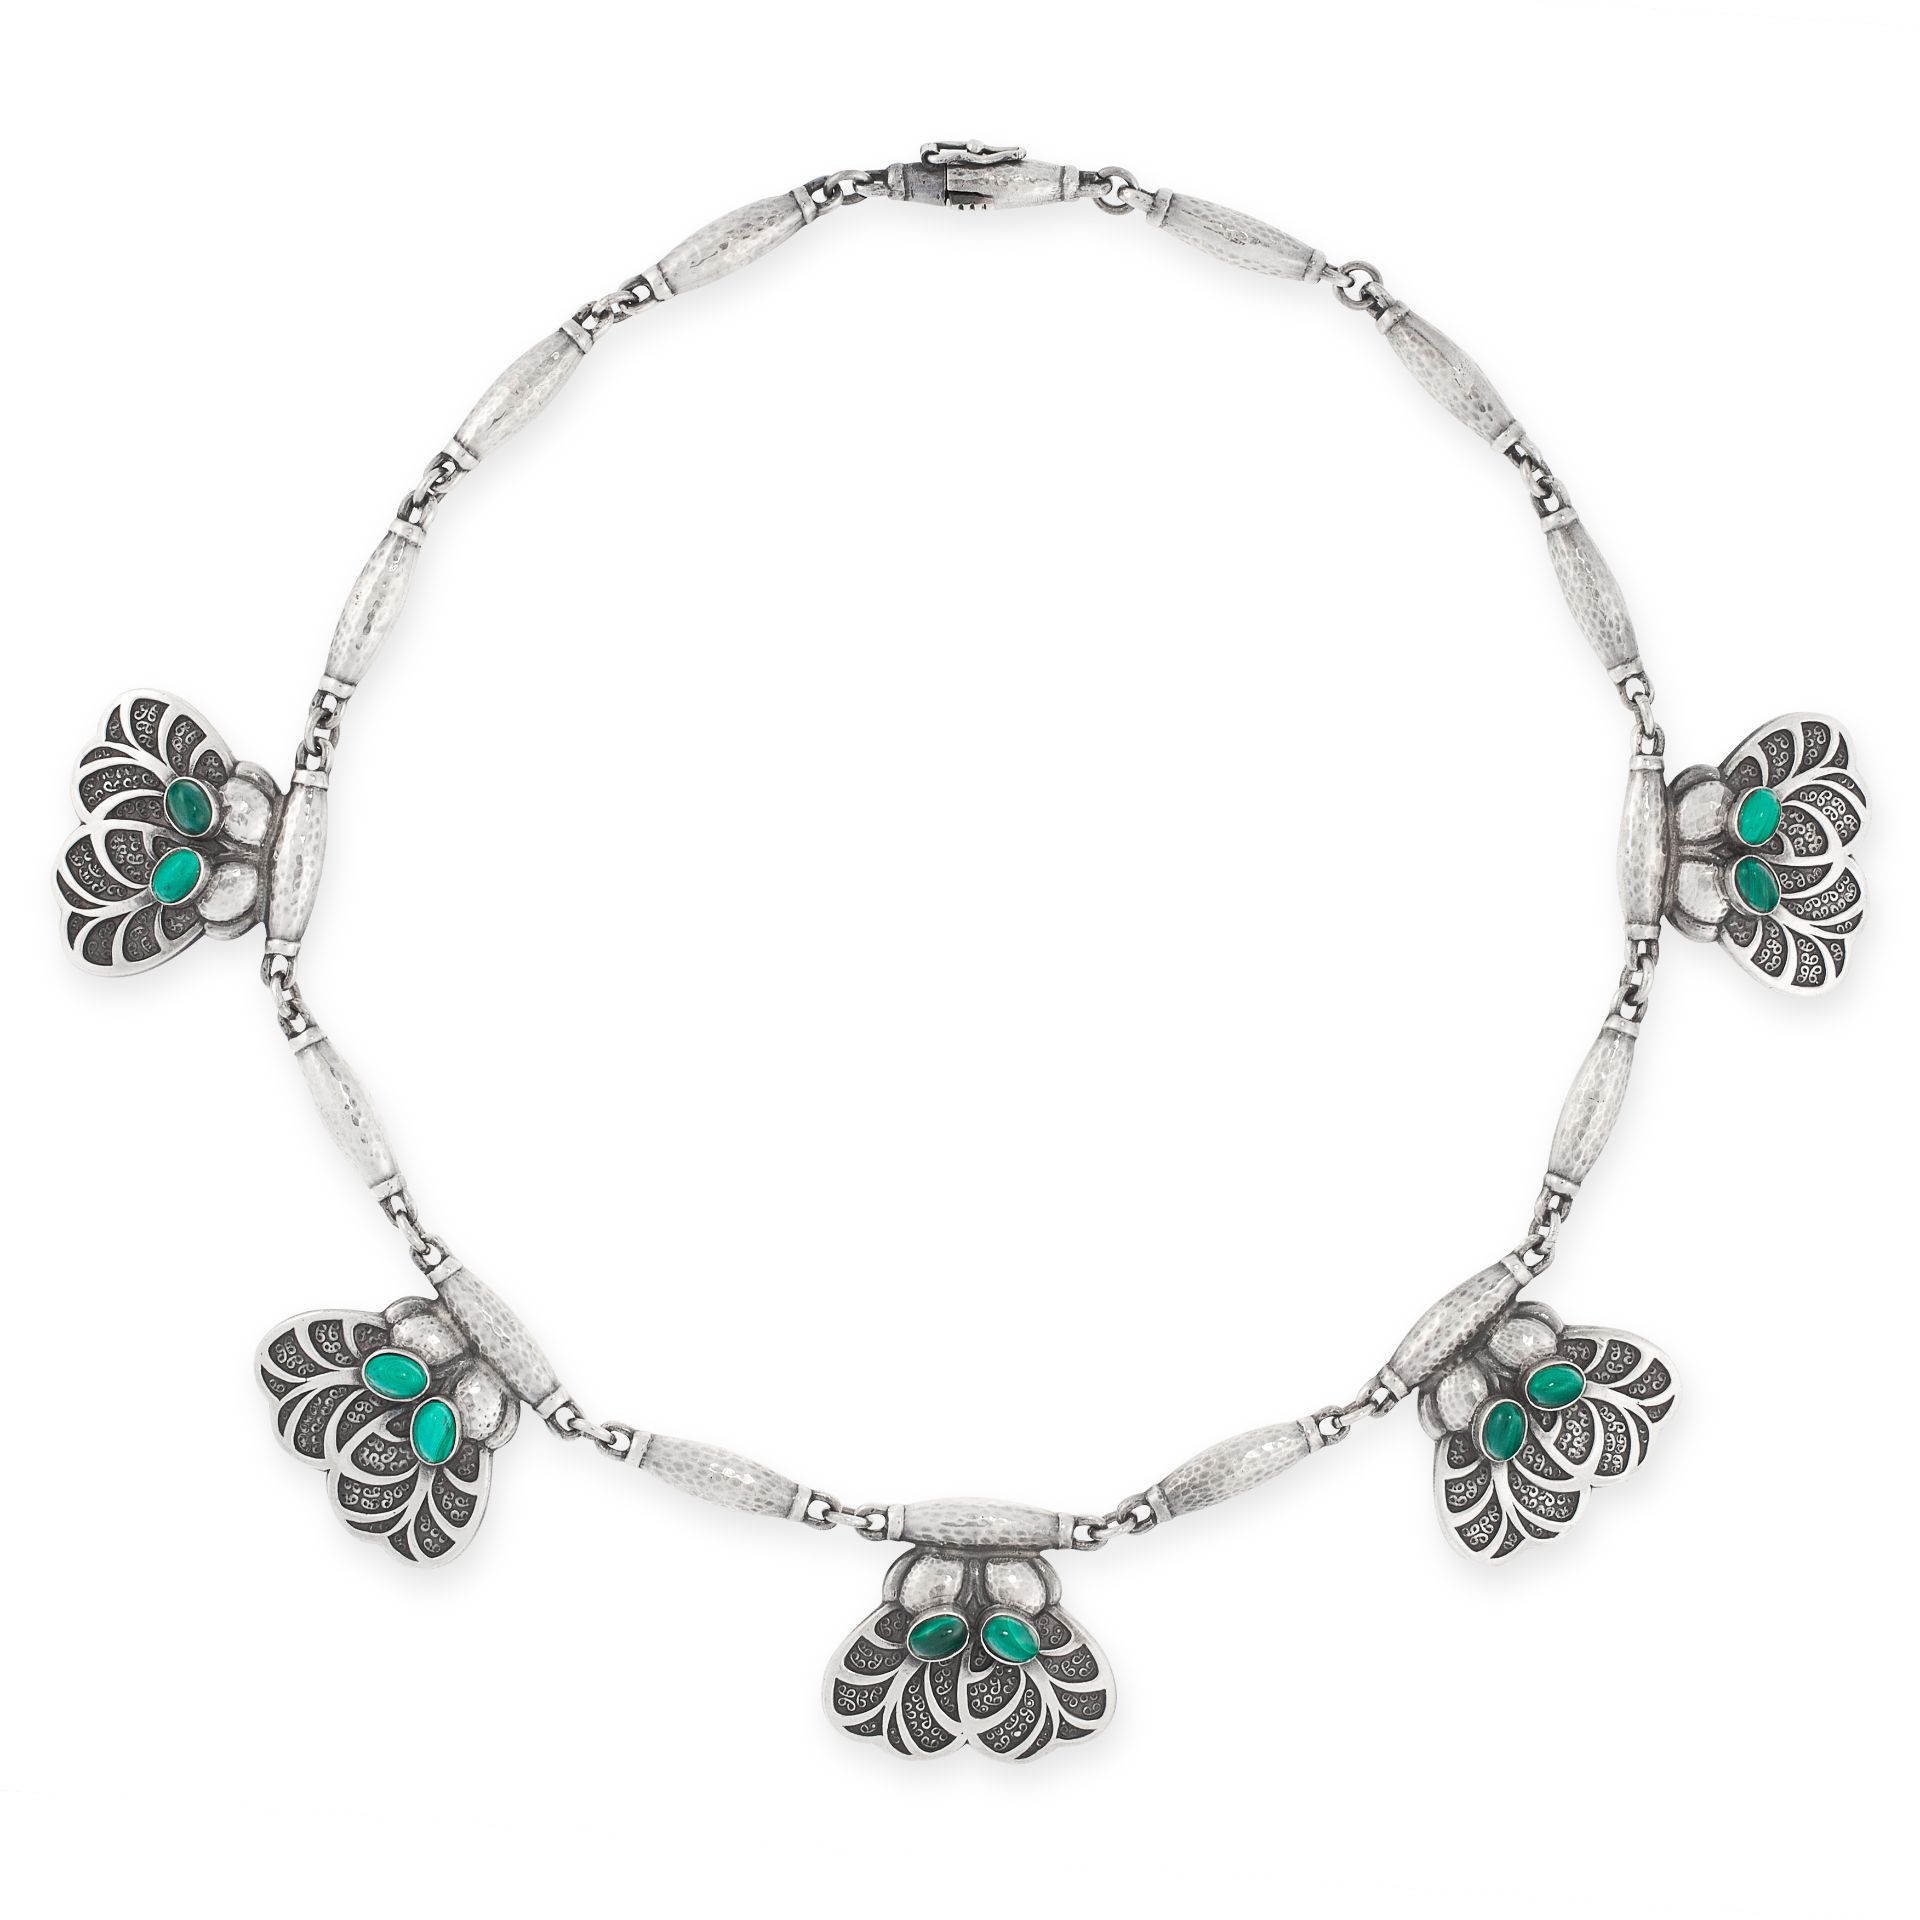 A MALACHITE NECKLACE, GEORG JENSEN 1933-1944 in silver, design number 4, the foliate links set